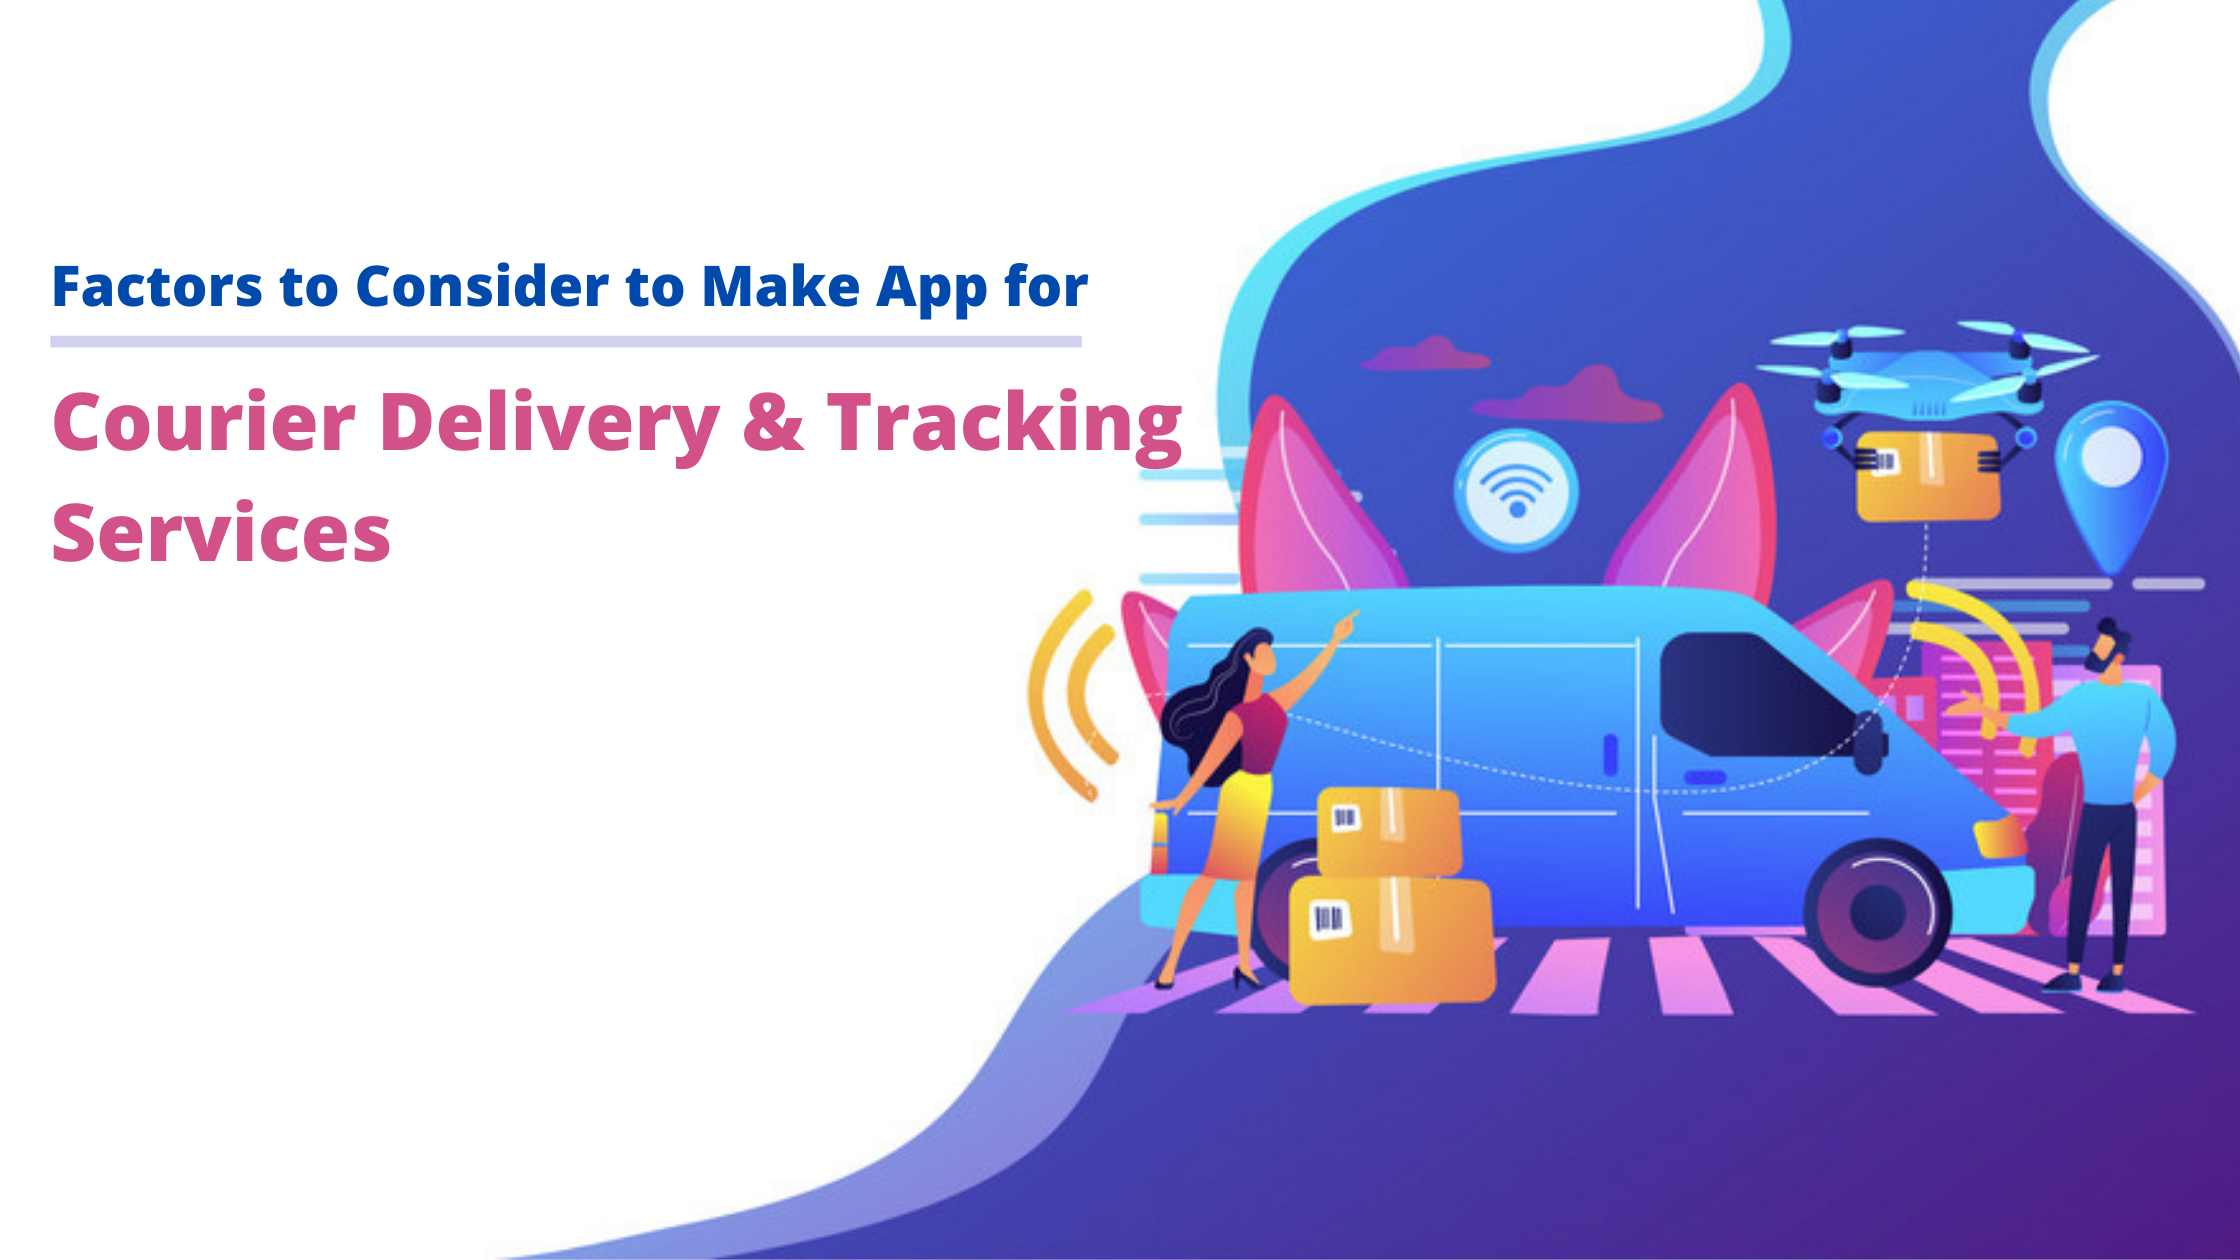 How to Make a Courier App for Courier Delivery &Tracking Services